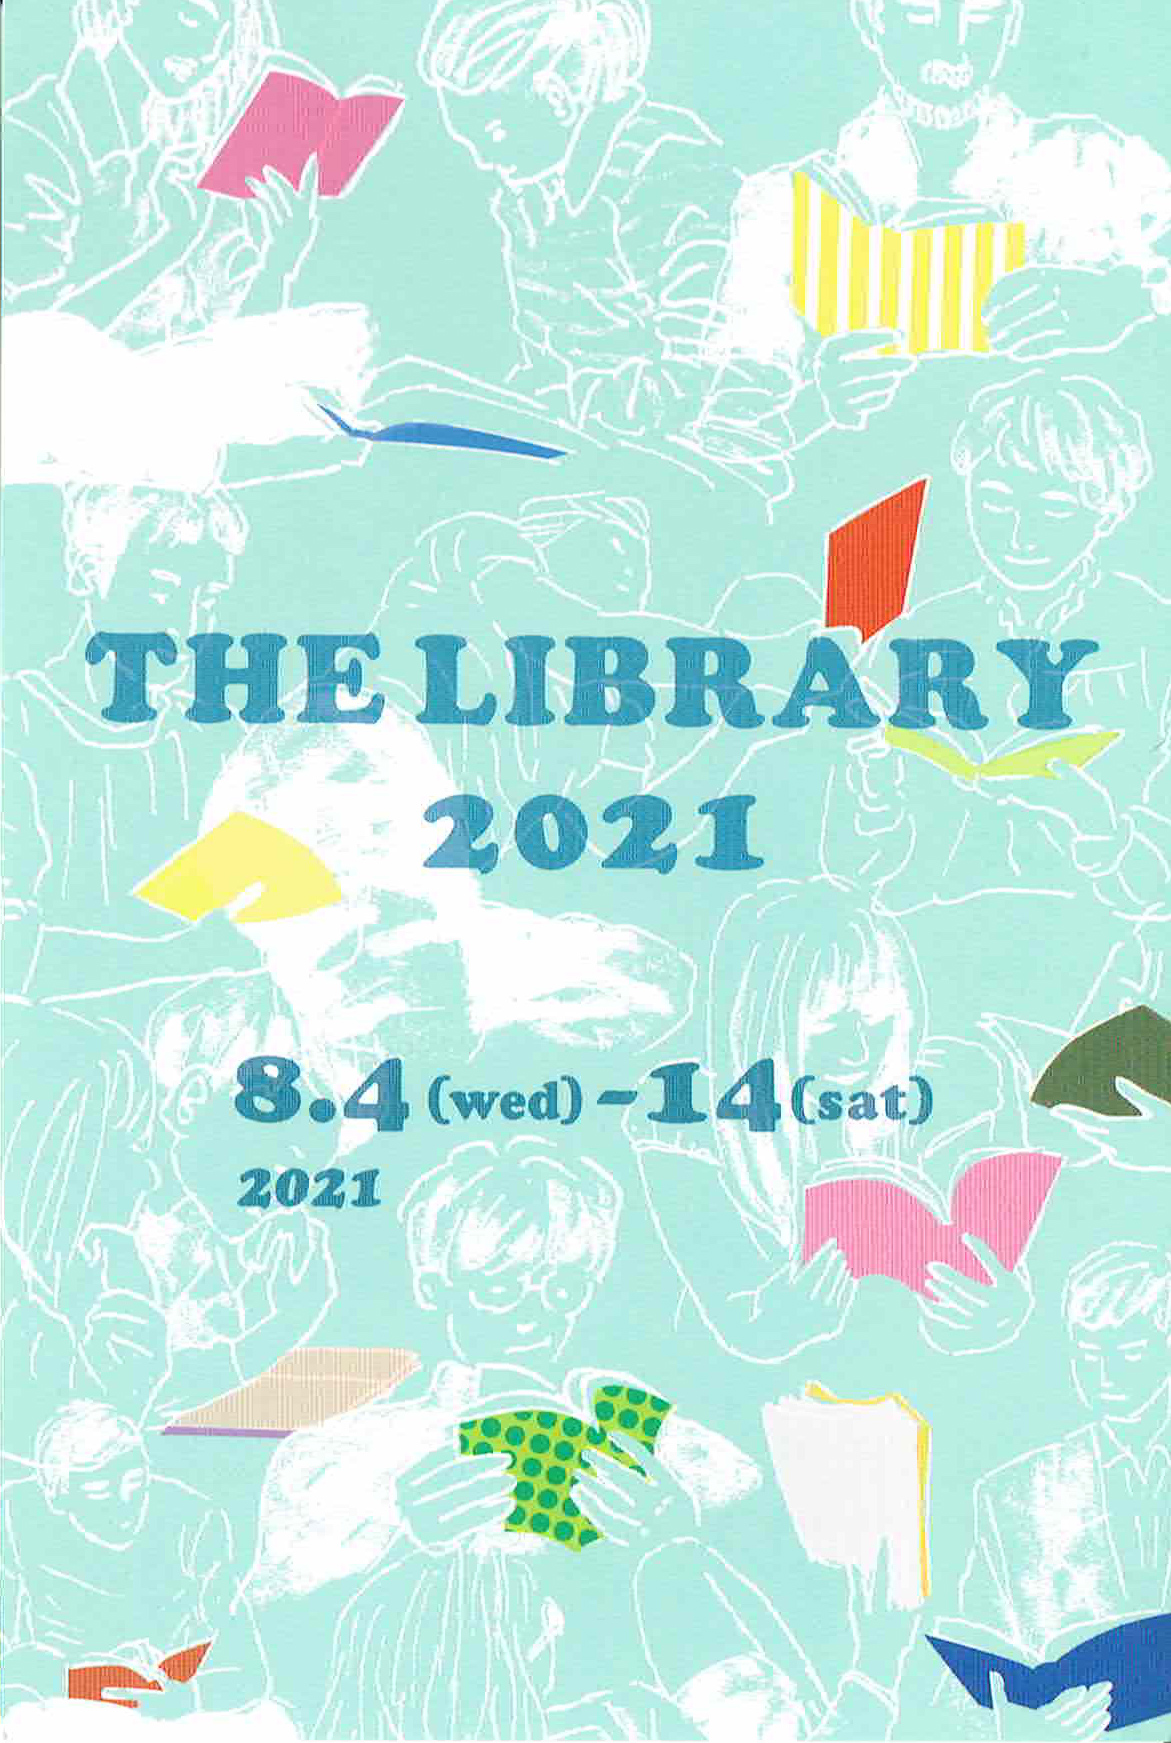 THE LIBRARY 2021